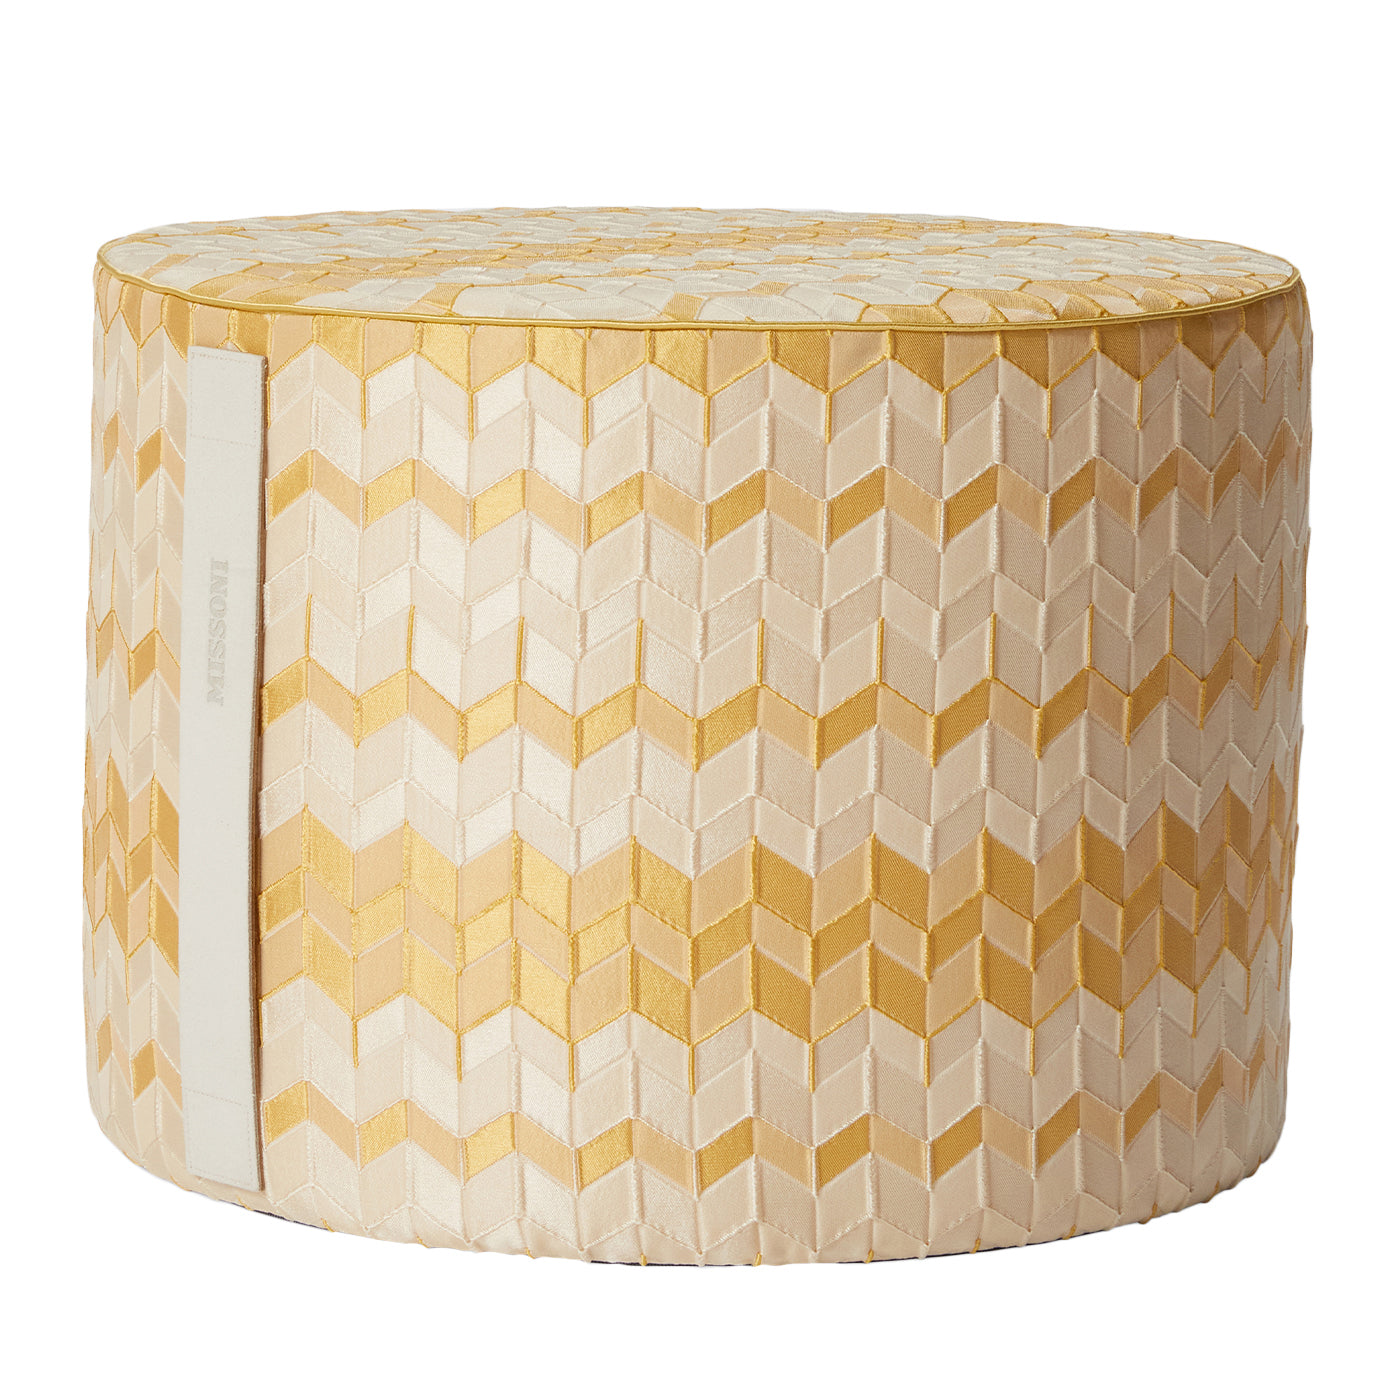 Tread Cylindrical 3D Effect Chevron Pattern Pouf - Main view